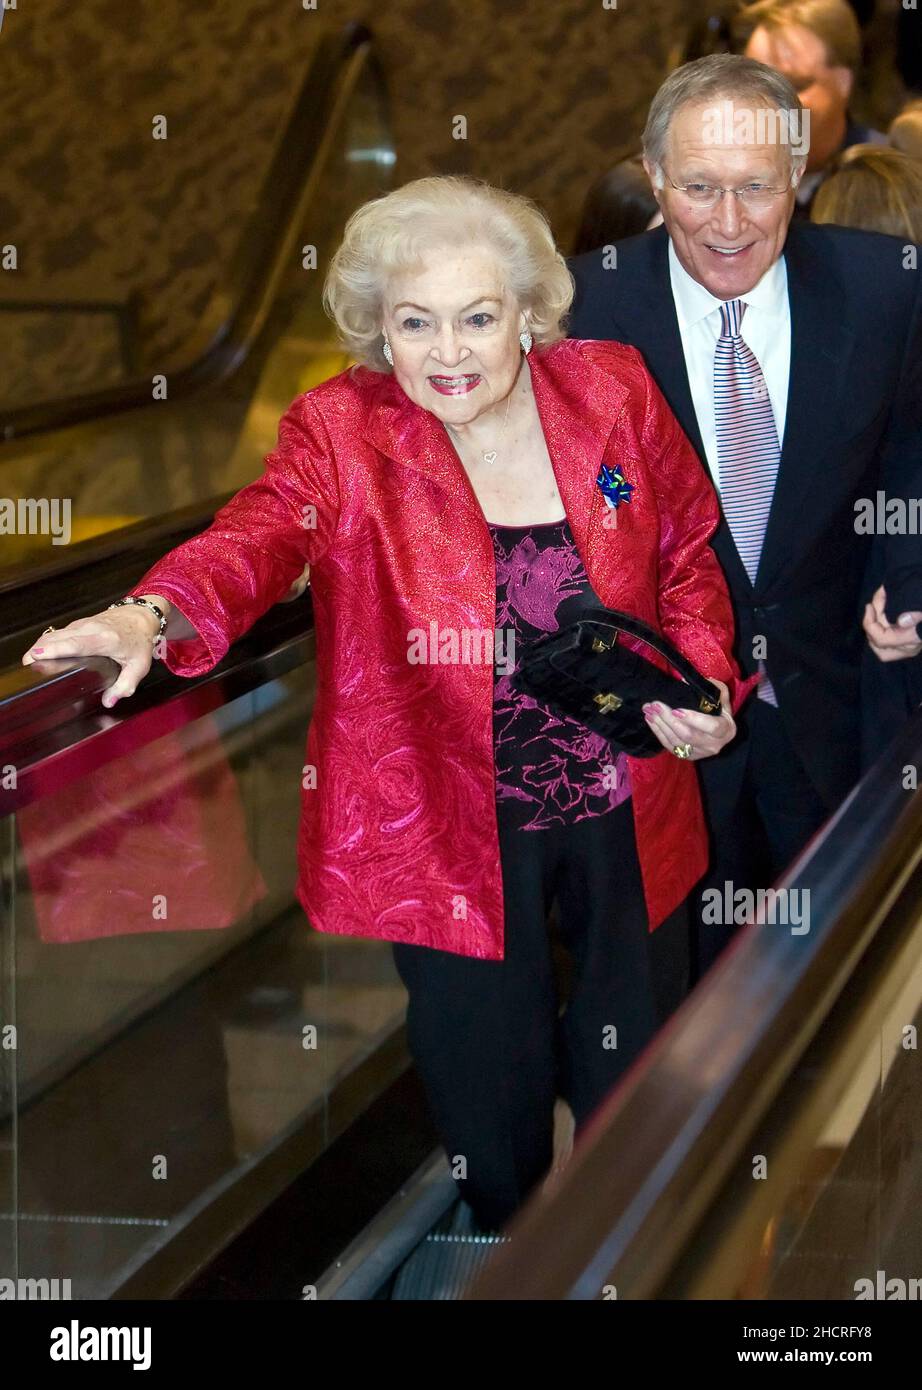 Kansas City, USA. 20th Jan, 2011. Actress Betty White arrives at Crown Center in Kansas City, Missouri, on Thursday, January 20, with Brad Moore, president of Hallmark Hall of Fame Productions, to watch the Hallmark Hall of Fame screening of her upcoming dramatic role in 'The Lost Valentine.' The screening coincided with a surprise birthday party for White. (Photo by Allison Long/Kansas City Star/MCT/Sipa USA) Credit: Sipa USA/Alamy Live News Stock Photo